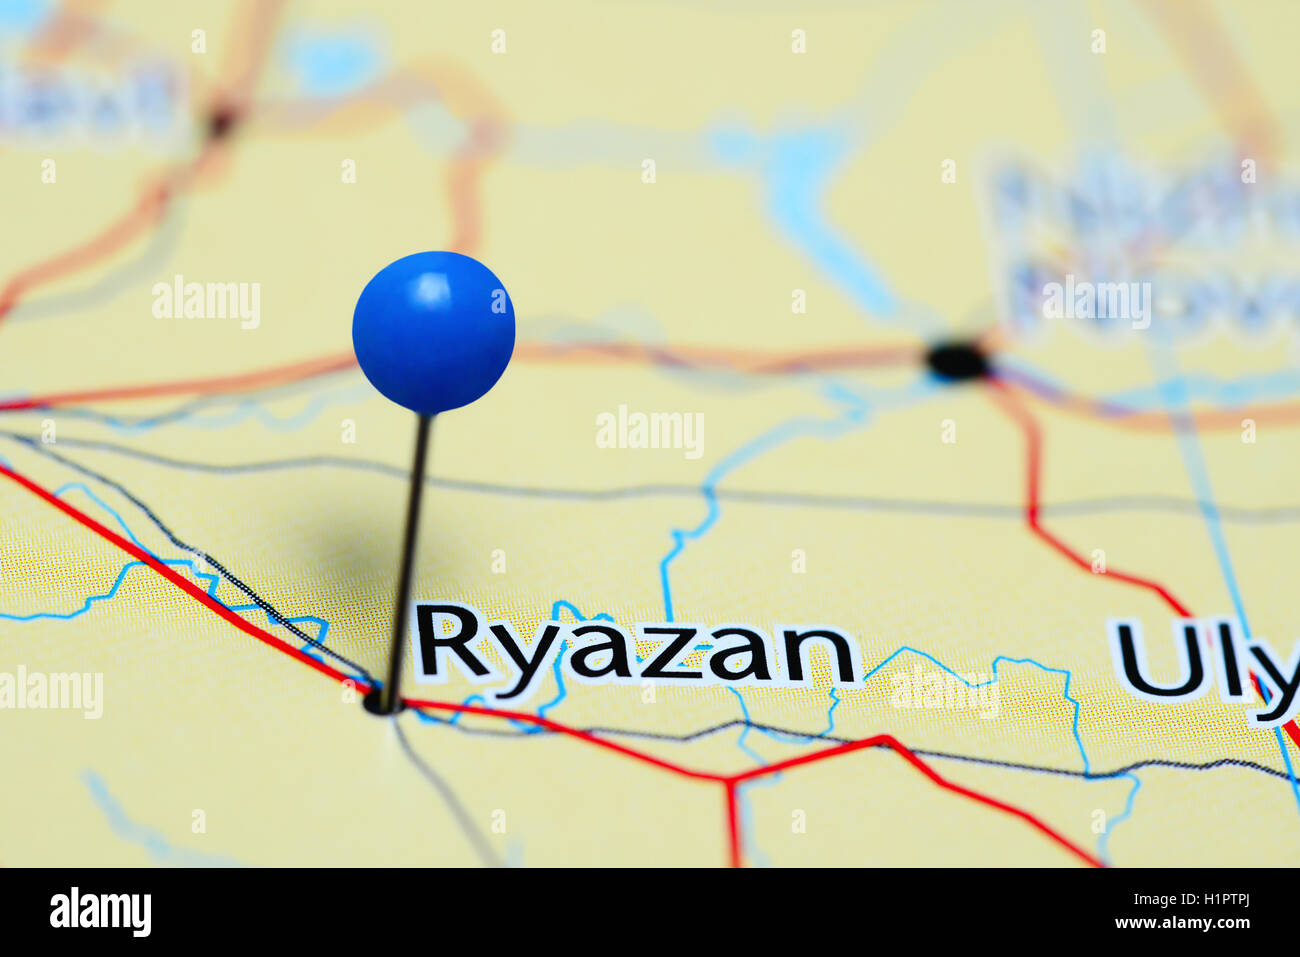 Ryazan pinned on a map of Russia Stock Photo